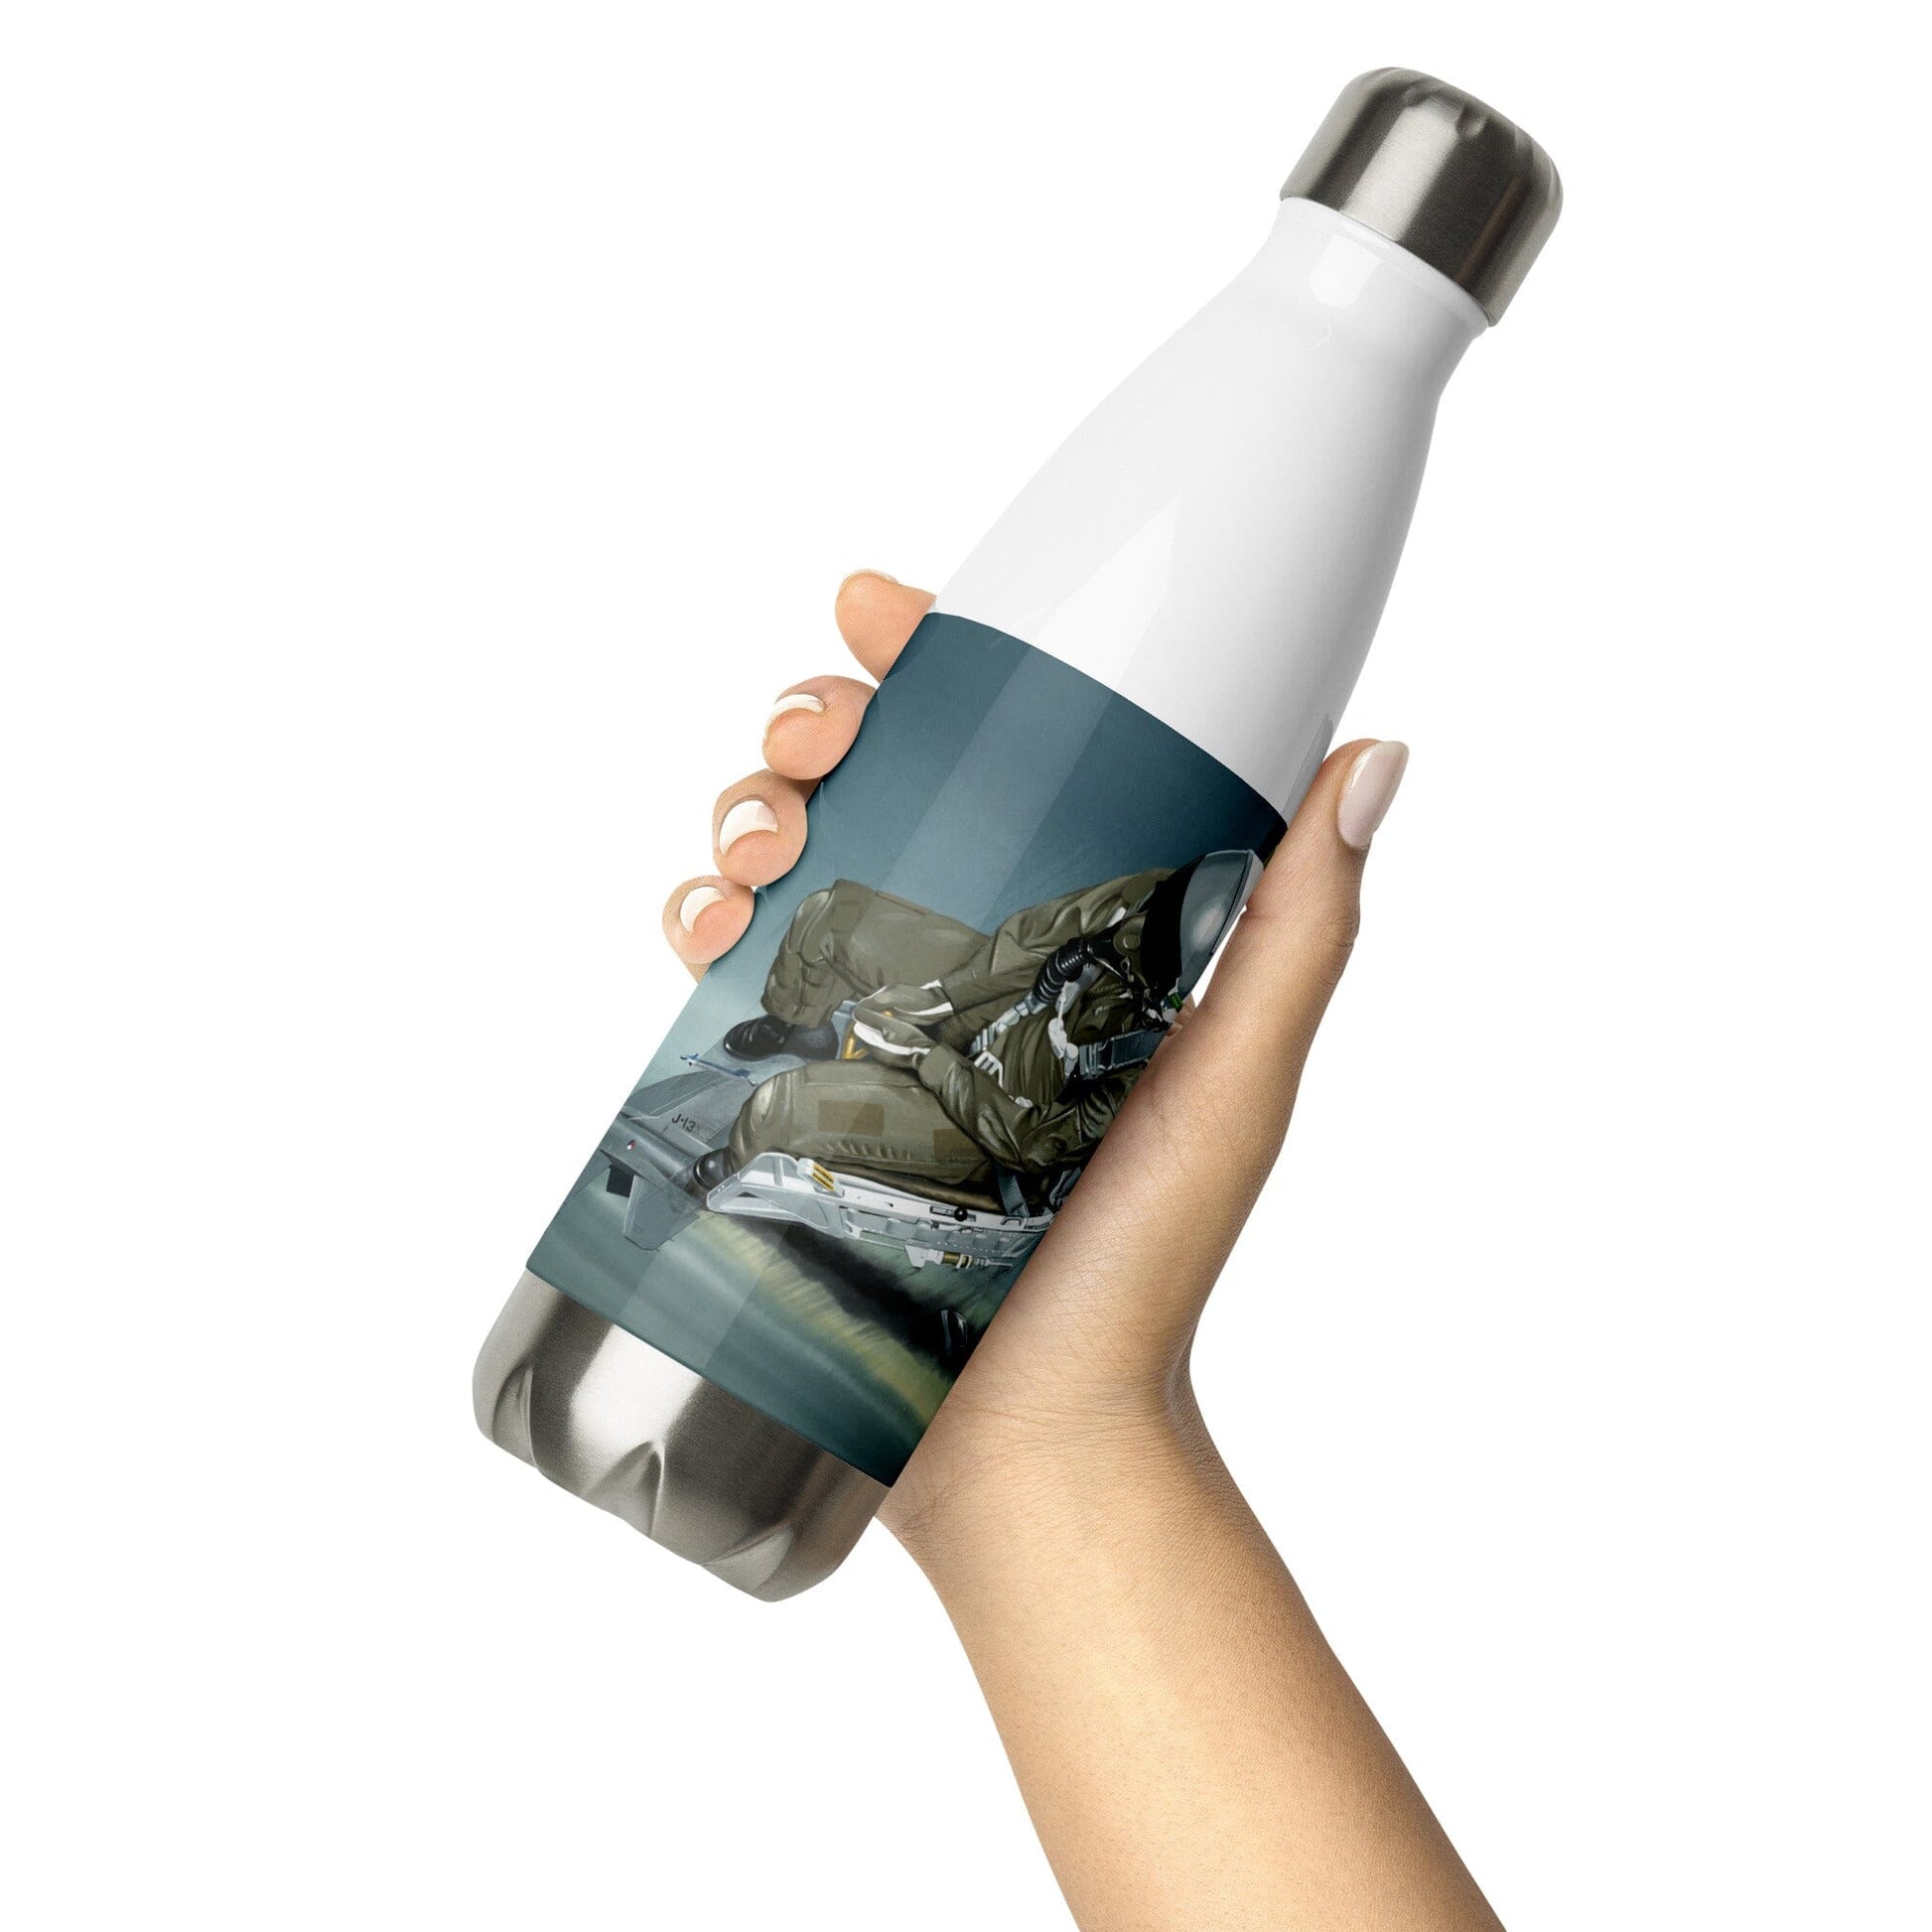 Thijs Postma - Water Bottle - F-16A Using Ejection Seat - Stainless Steel 17oz Water Bottles TP Aviation Art 